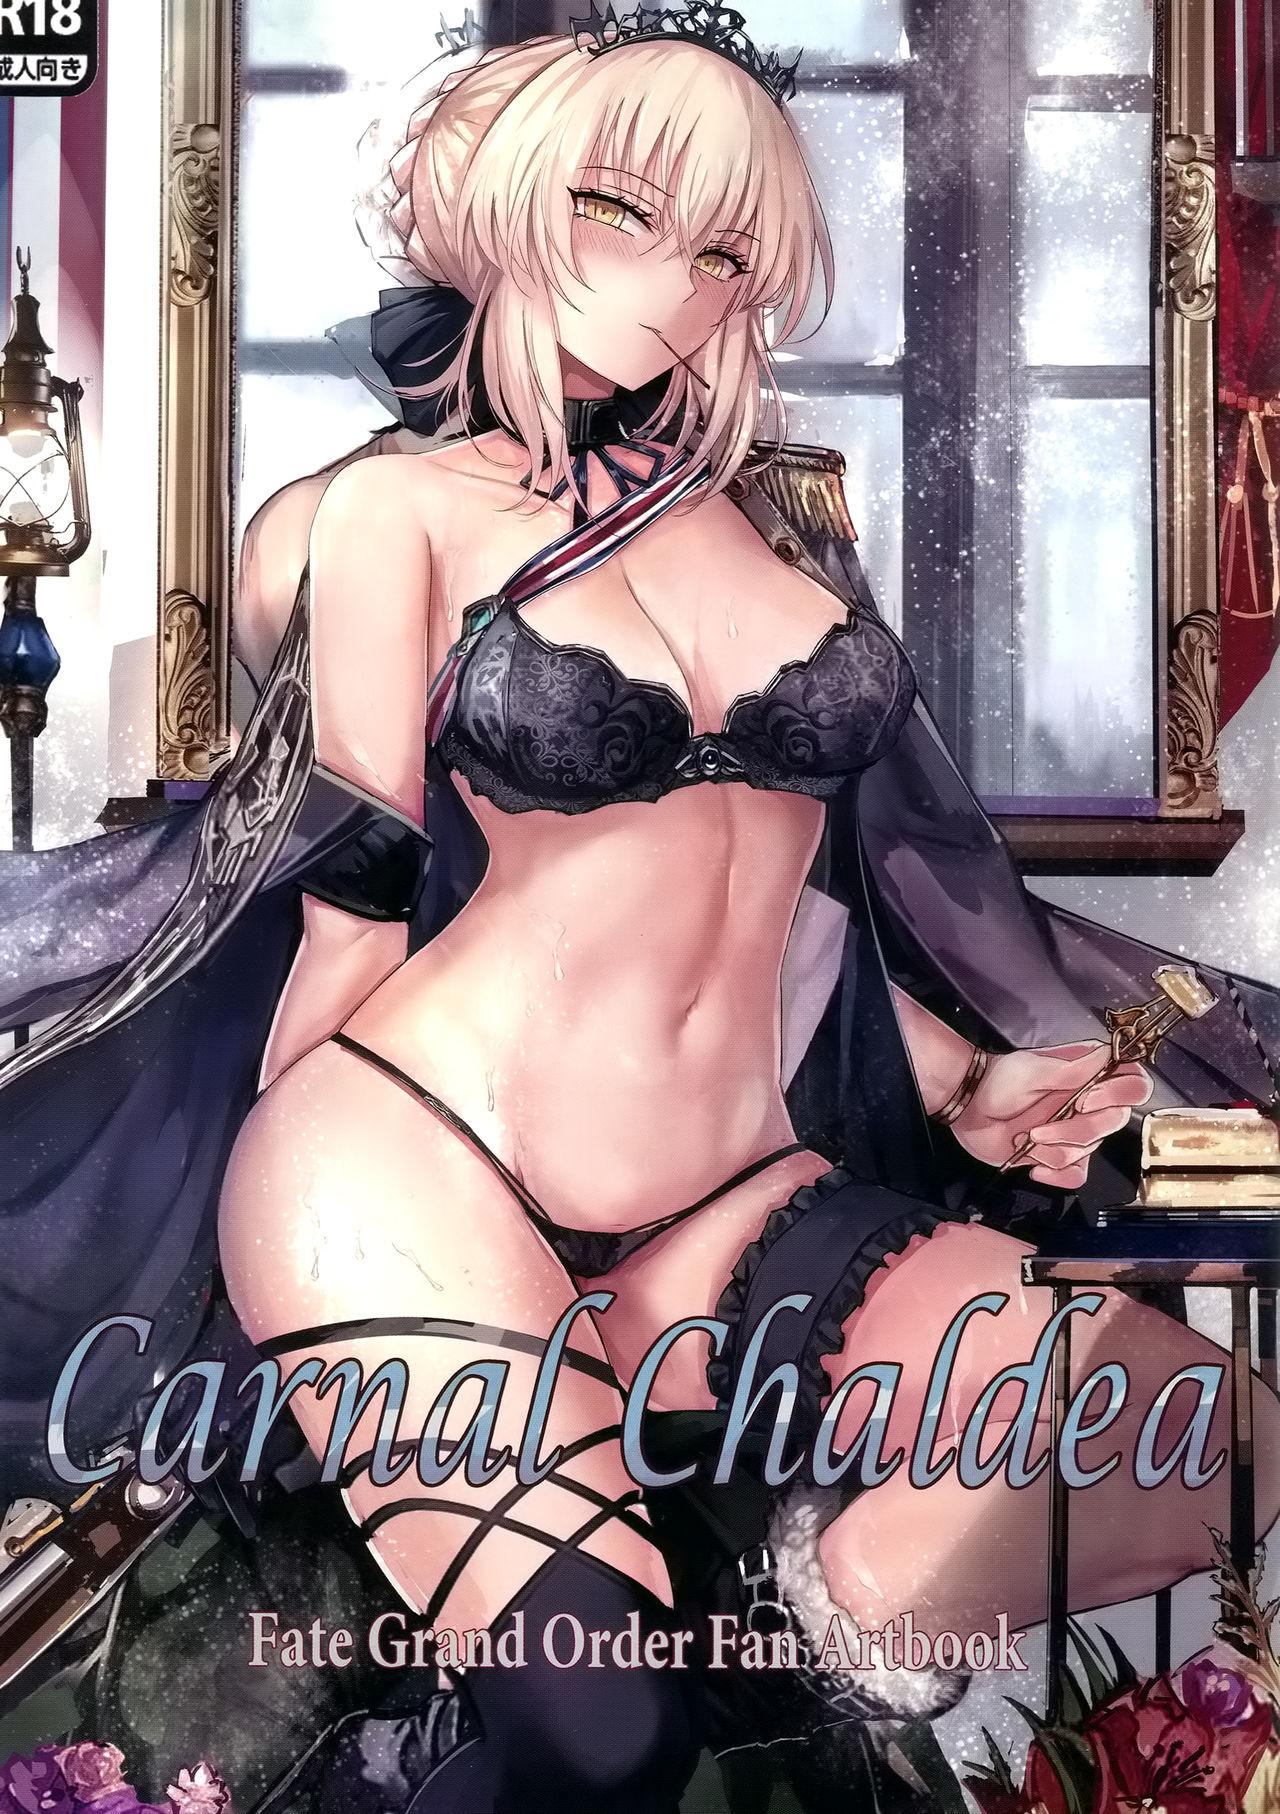 Glam Carnal Chaldea - Fate grand order Girl Girl - Picture 1